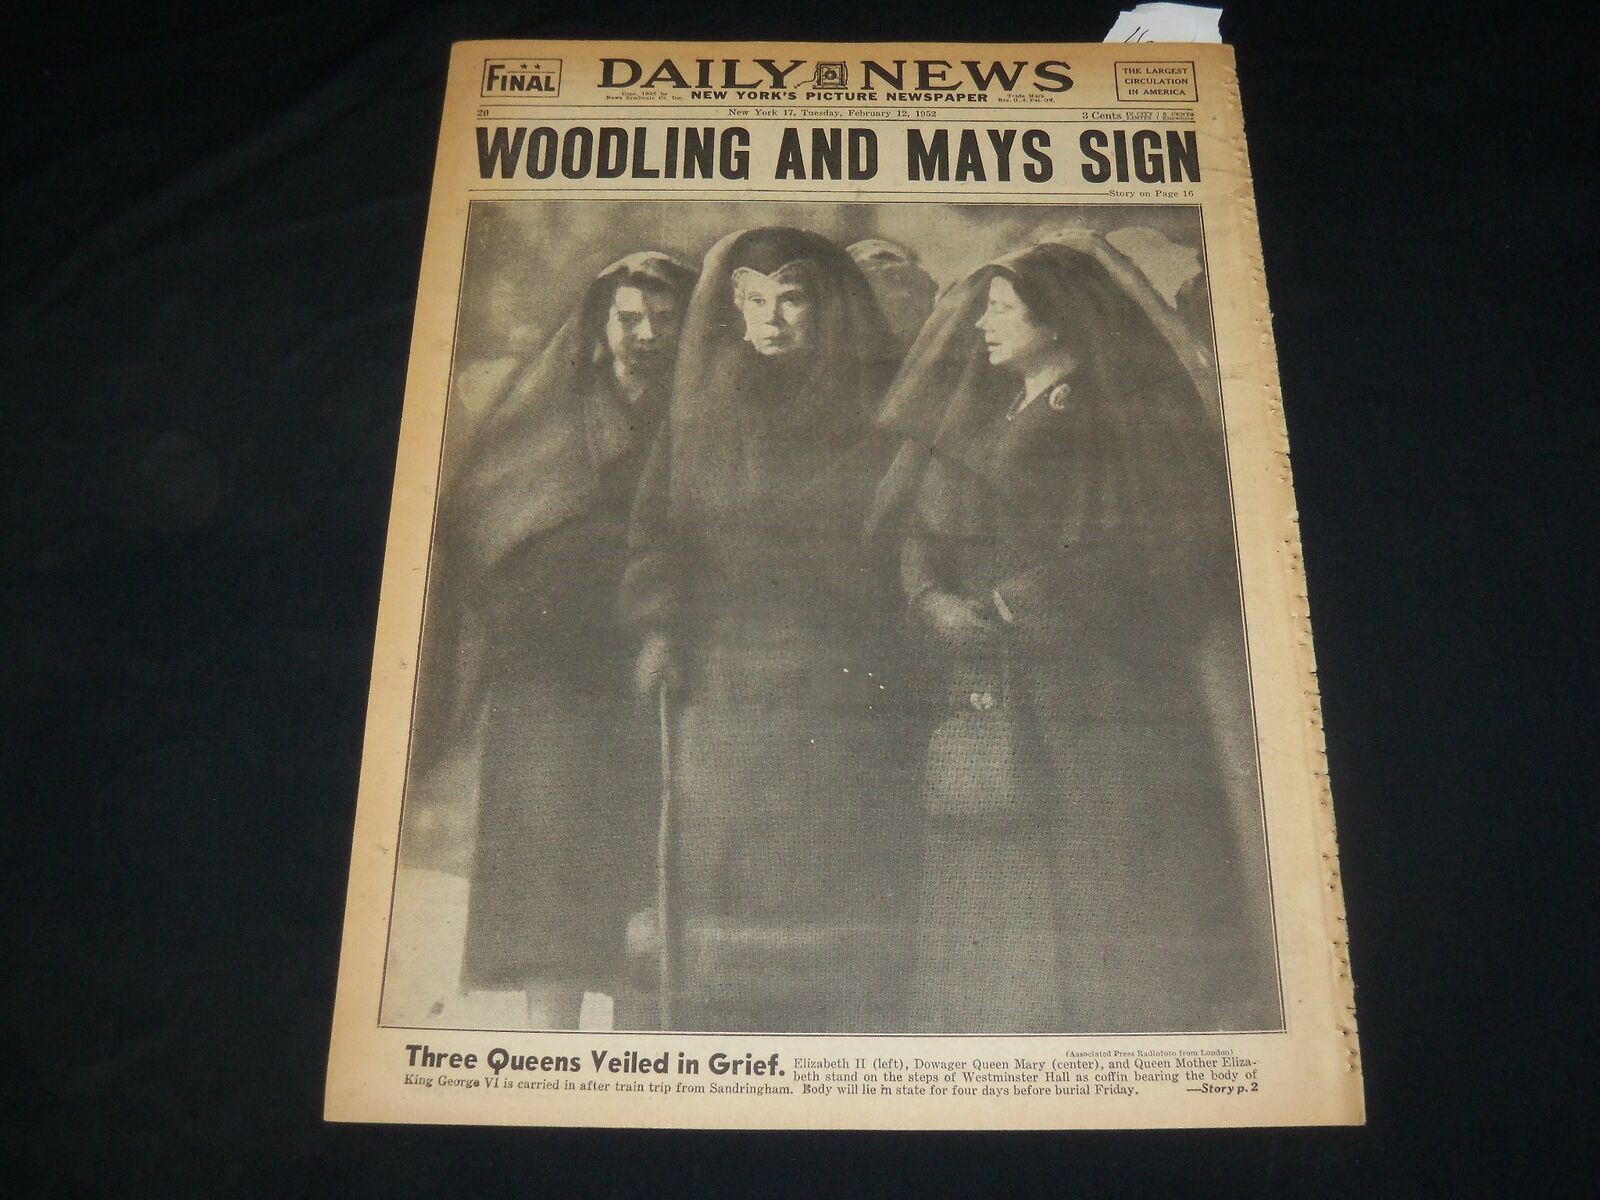 1952 FEBRUARY 12 NEW YORK DAILY NEWS - THREE QUEENS VEILED IN GRIEF - NP 5392